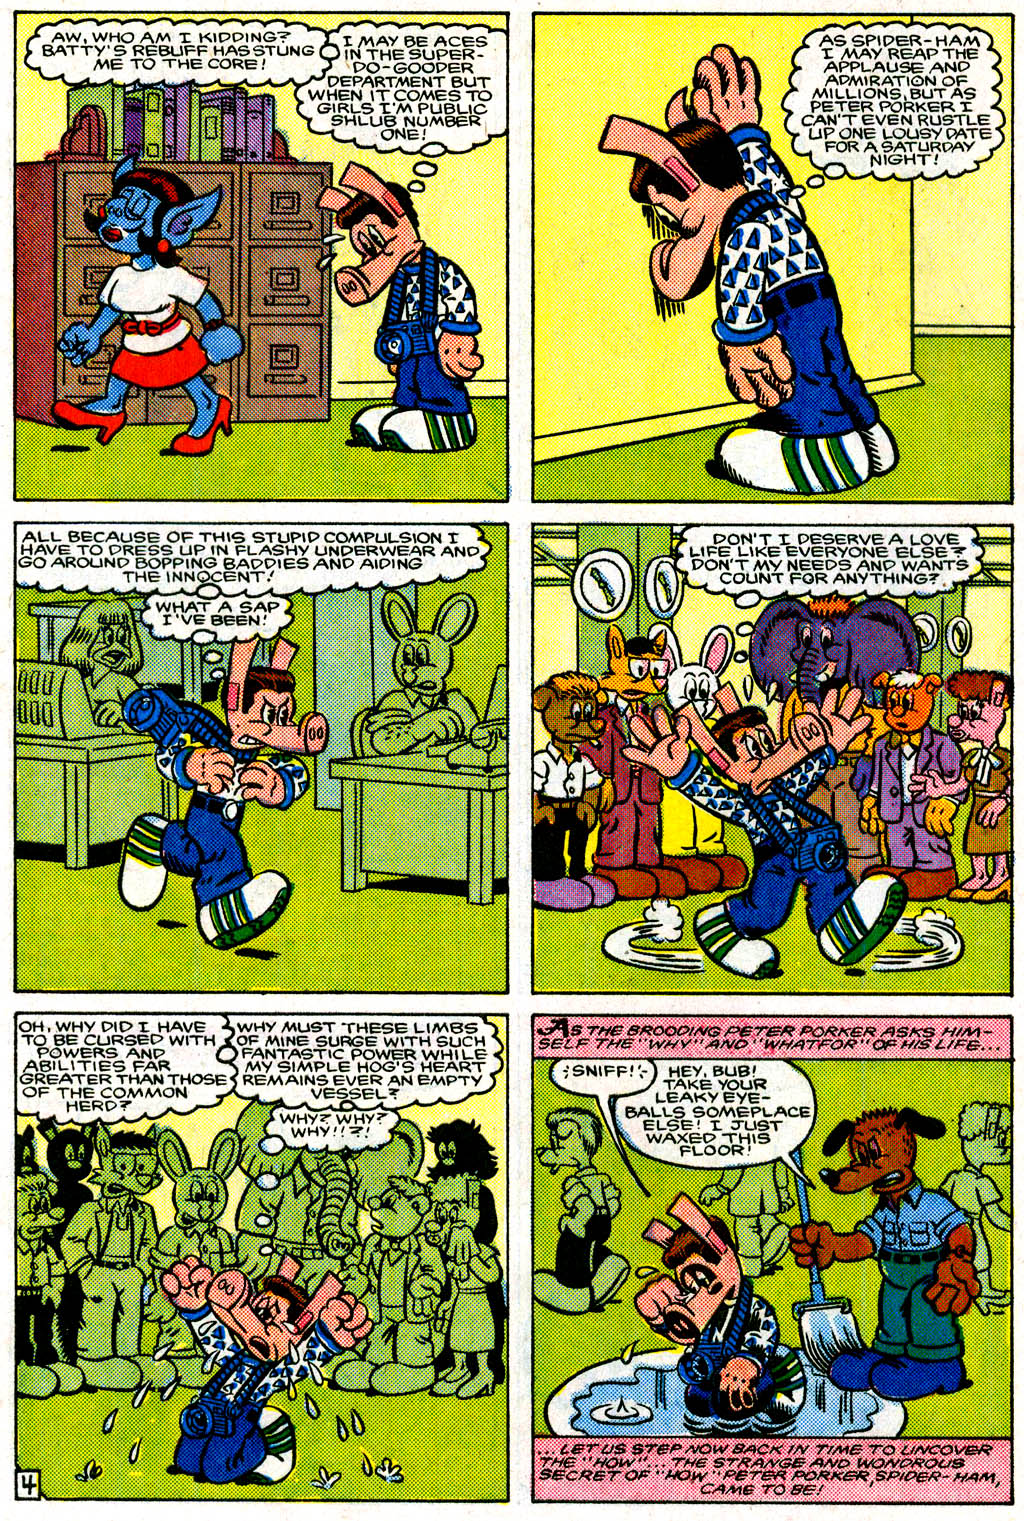 Read online Peter Porker, The Spectacular Spider-Ham comic -  Issue #15 - 5